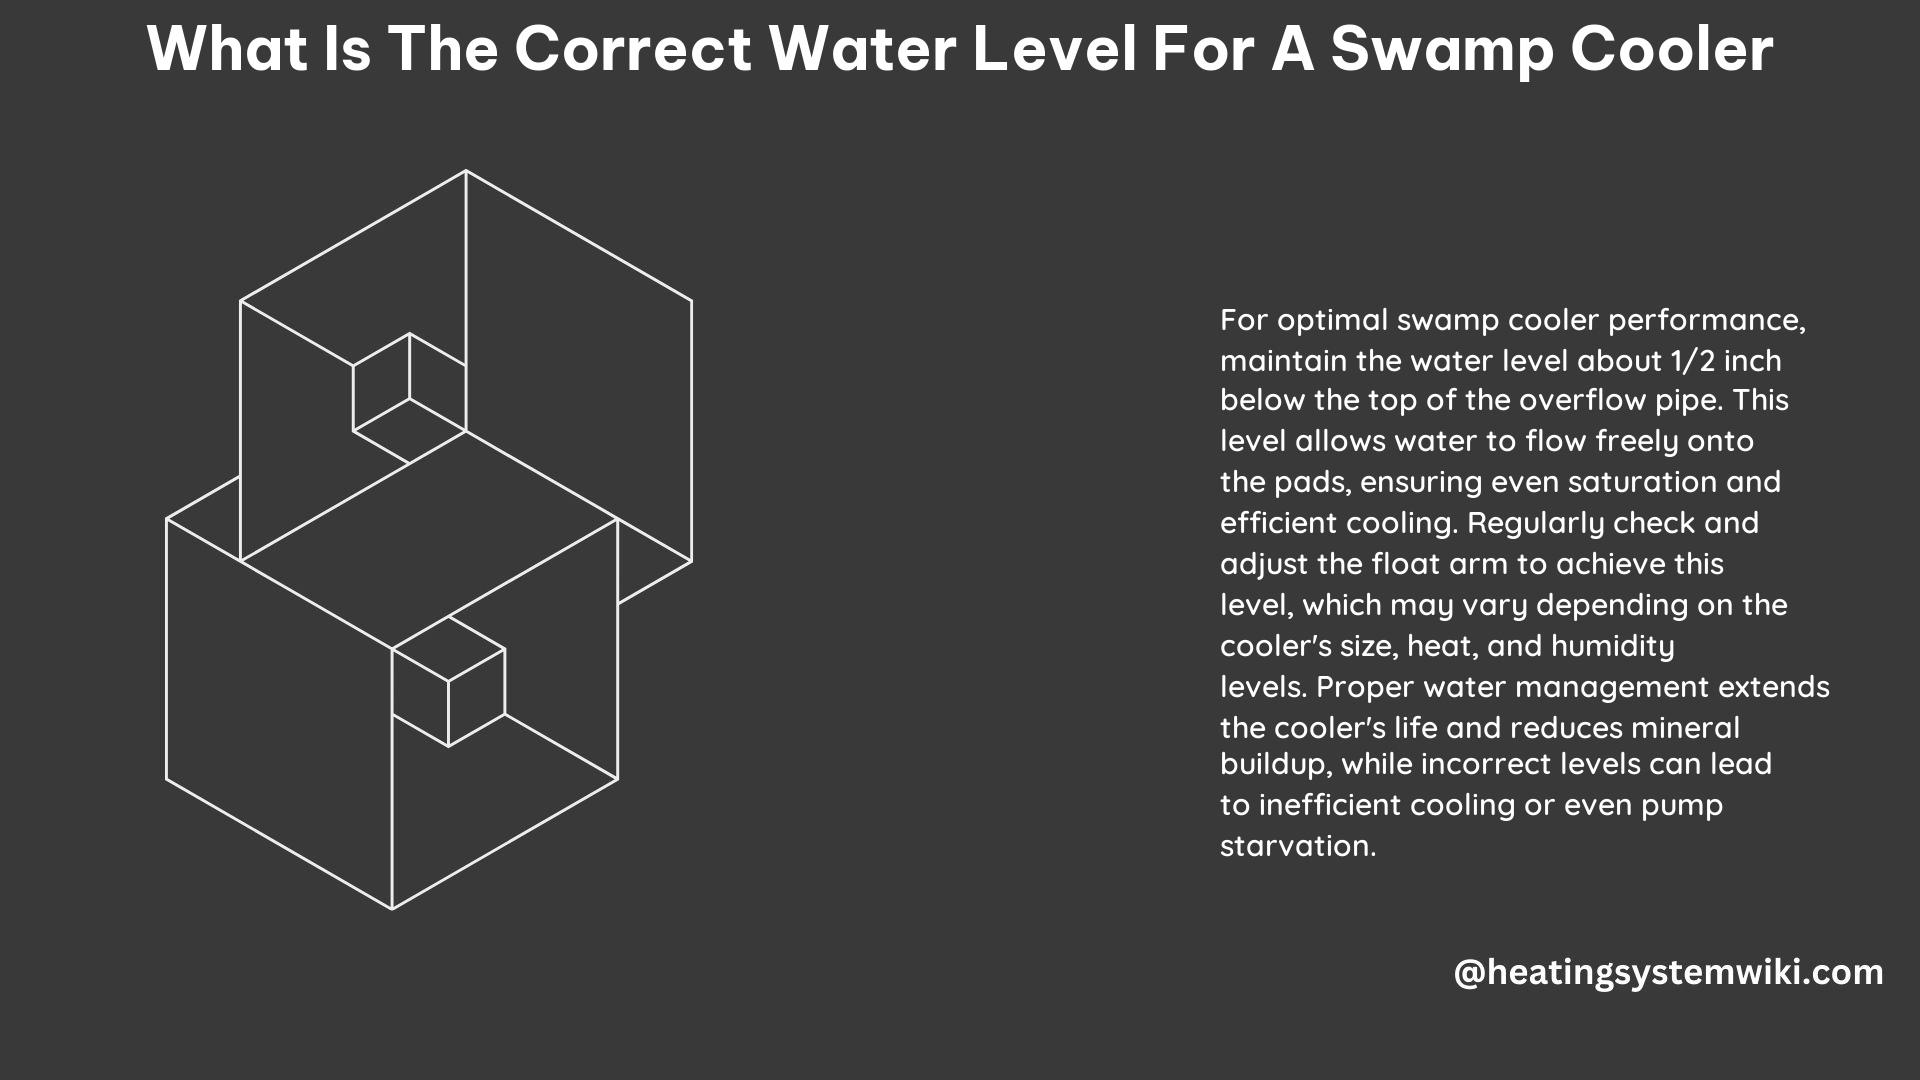 What Is the Correct Water Level for a Swamp Cooler